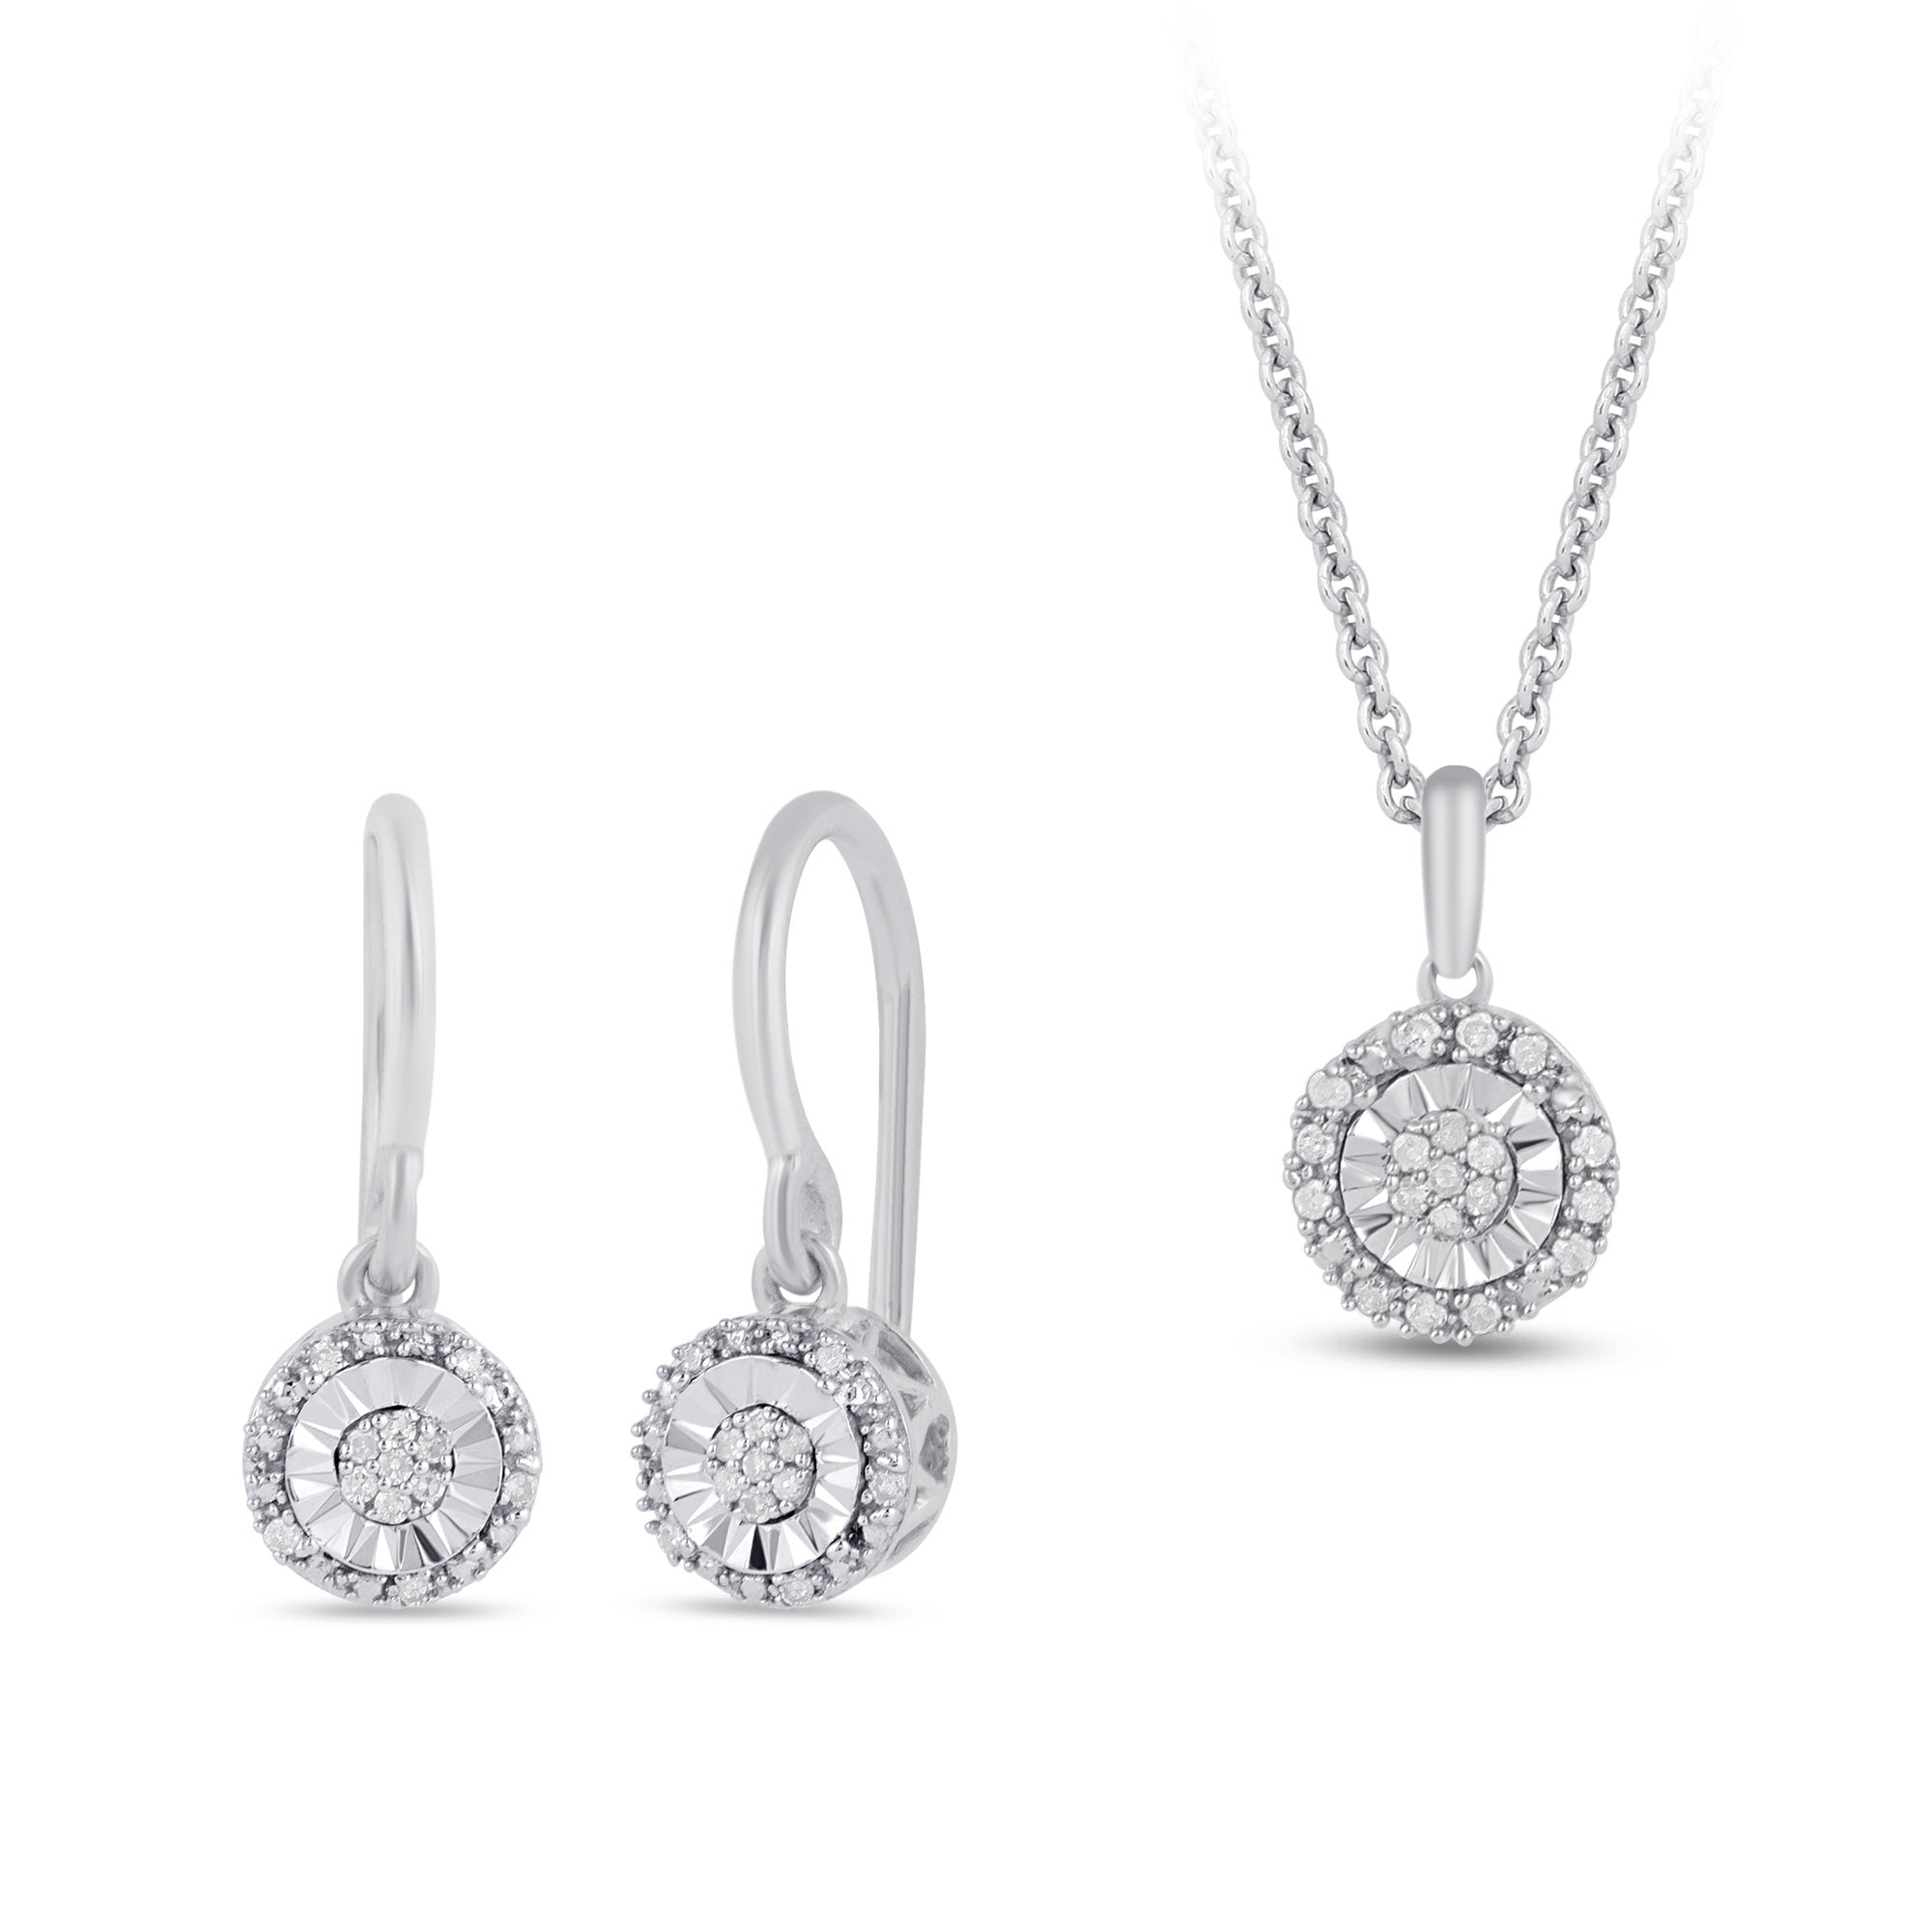 Diamond Miracle Halo Earring & Necklace Set in Sterling Silver Jewellery Sets Bevilles 